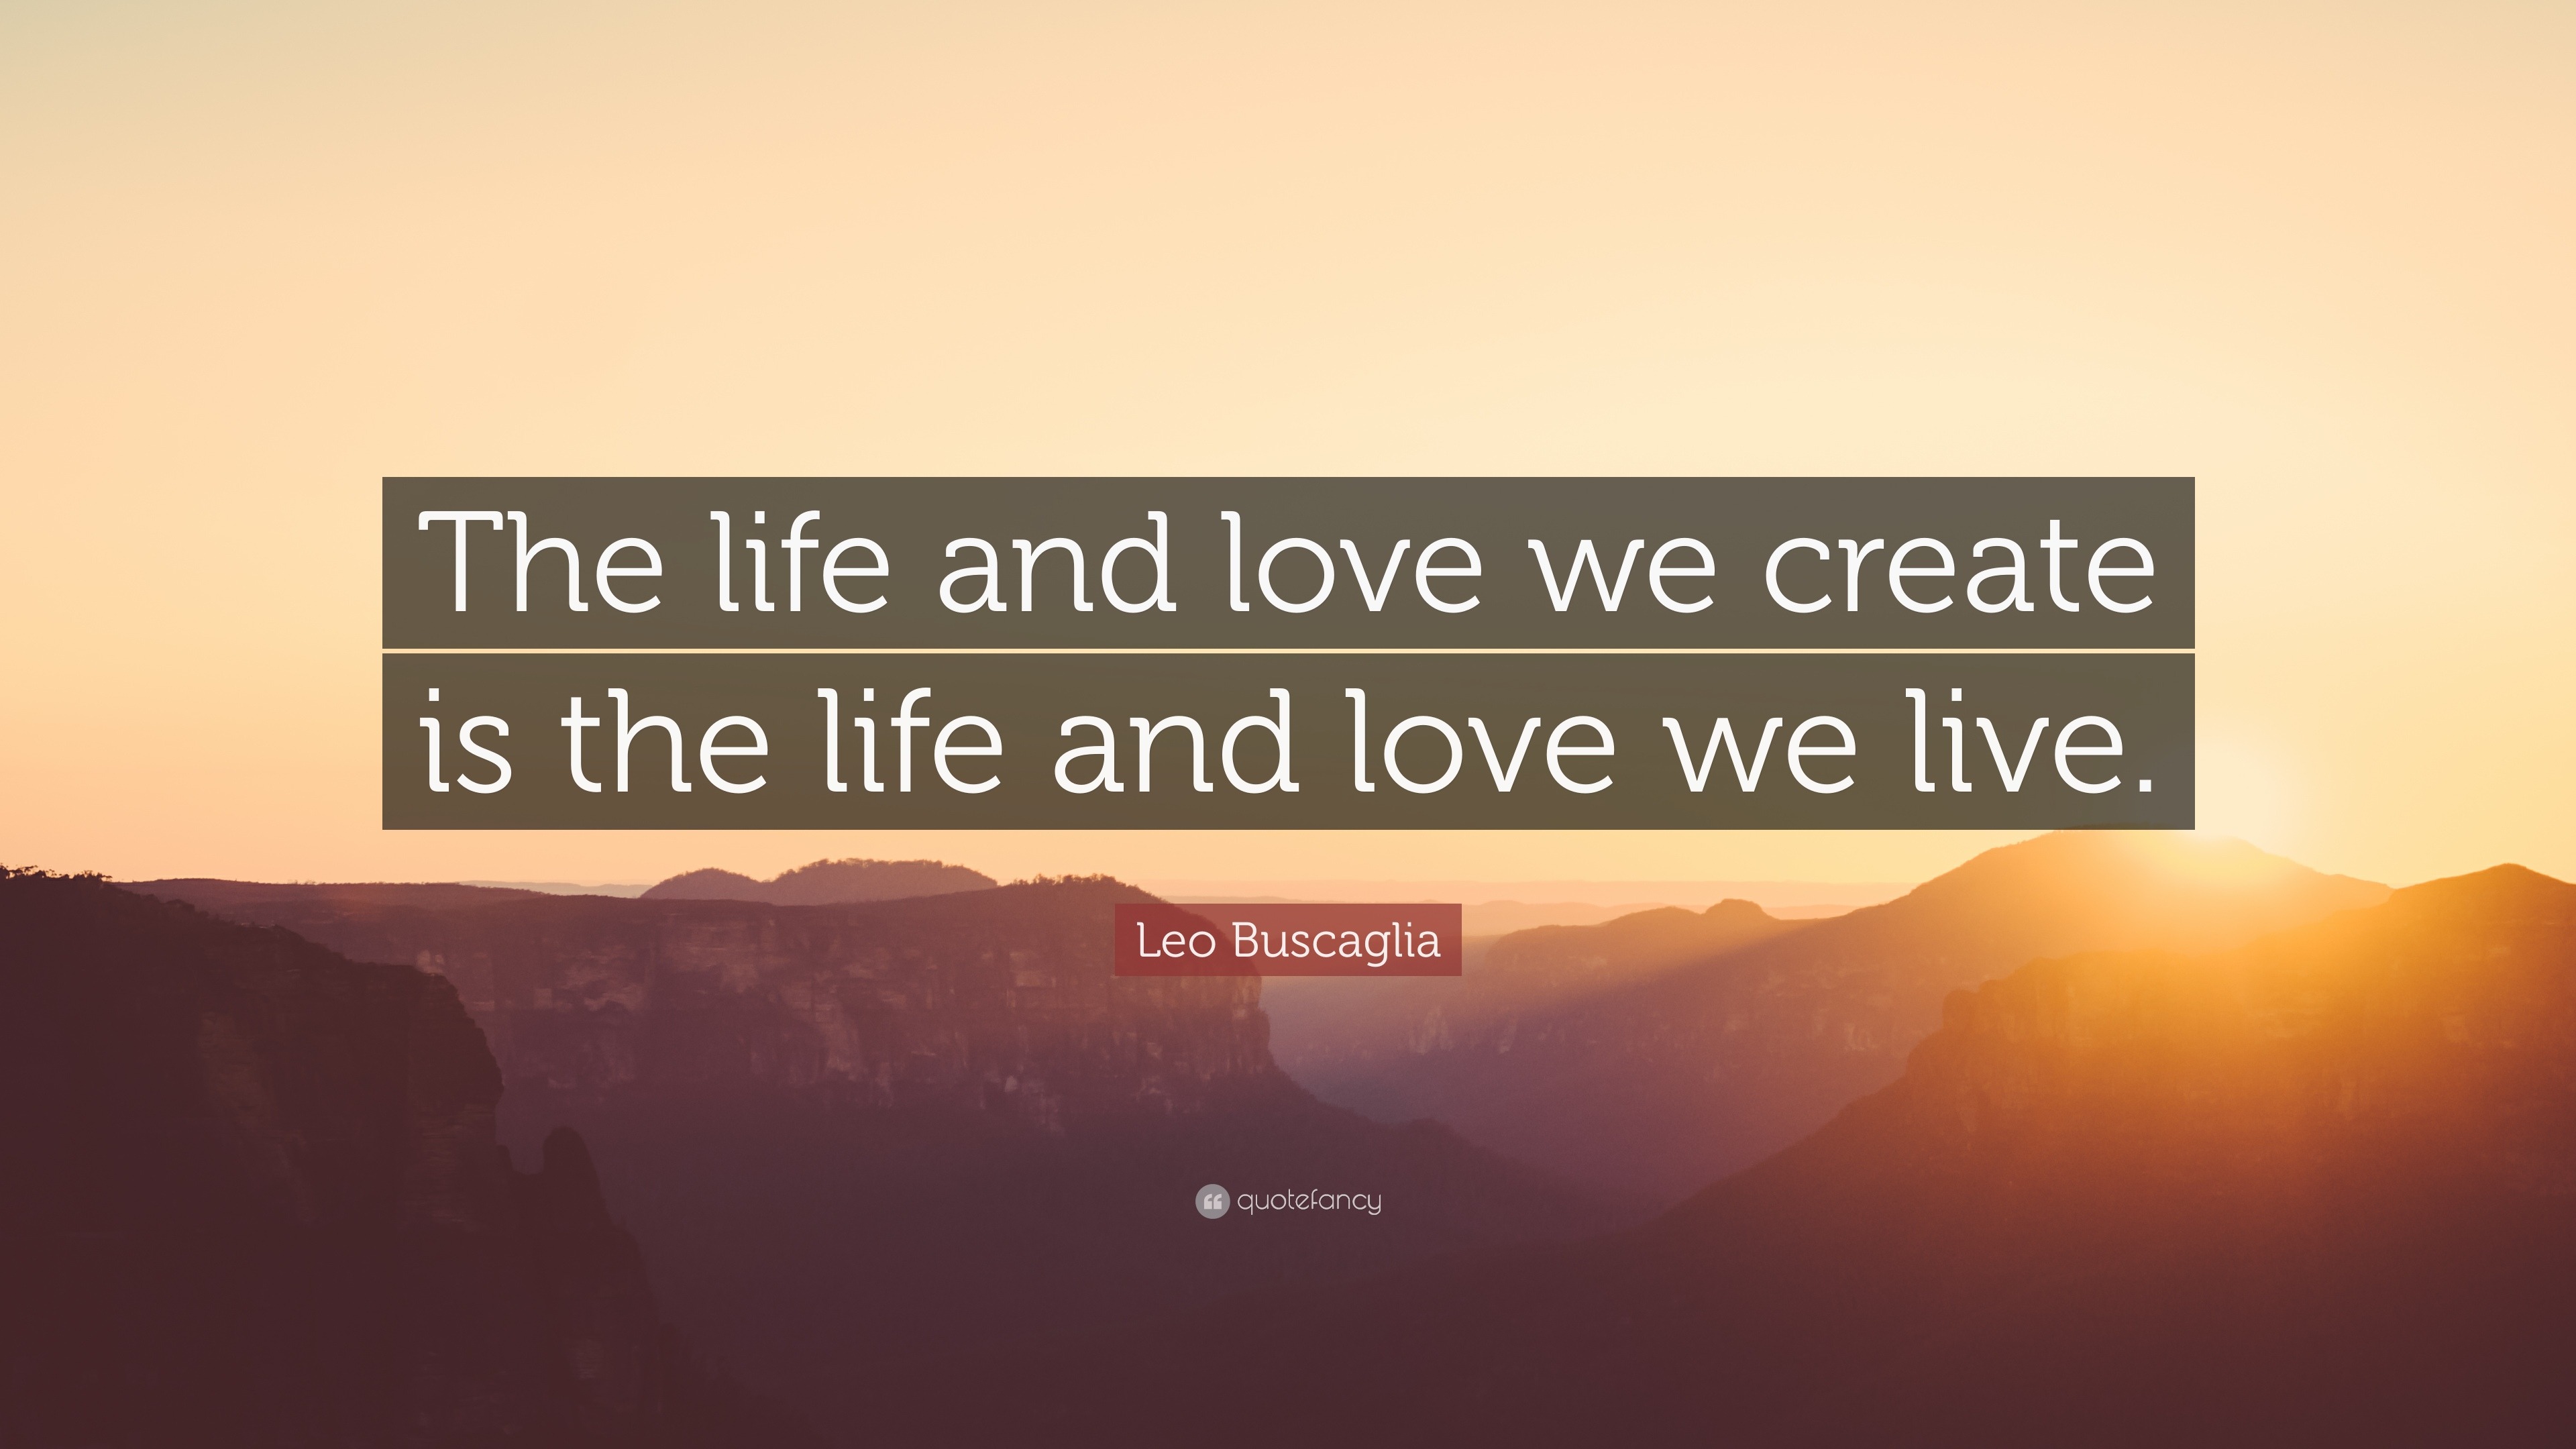 Leo Buscaglia Quote “The life and love we create is the life and love